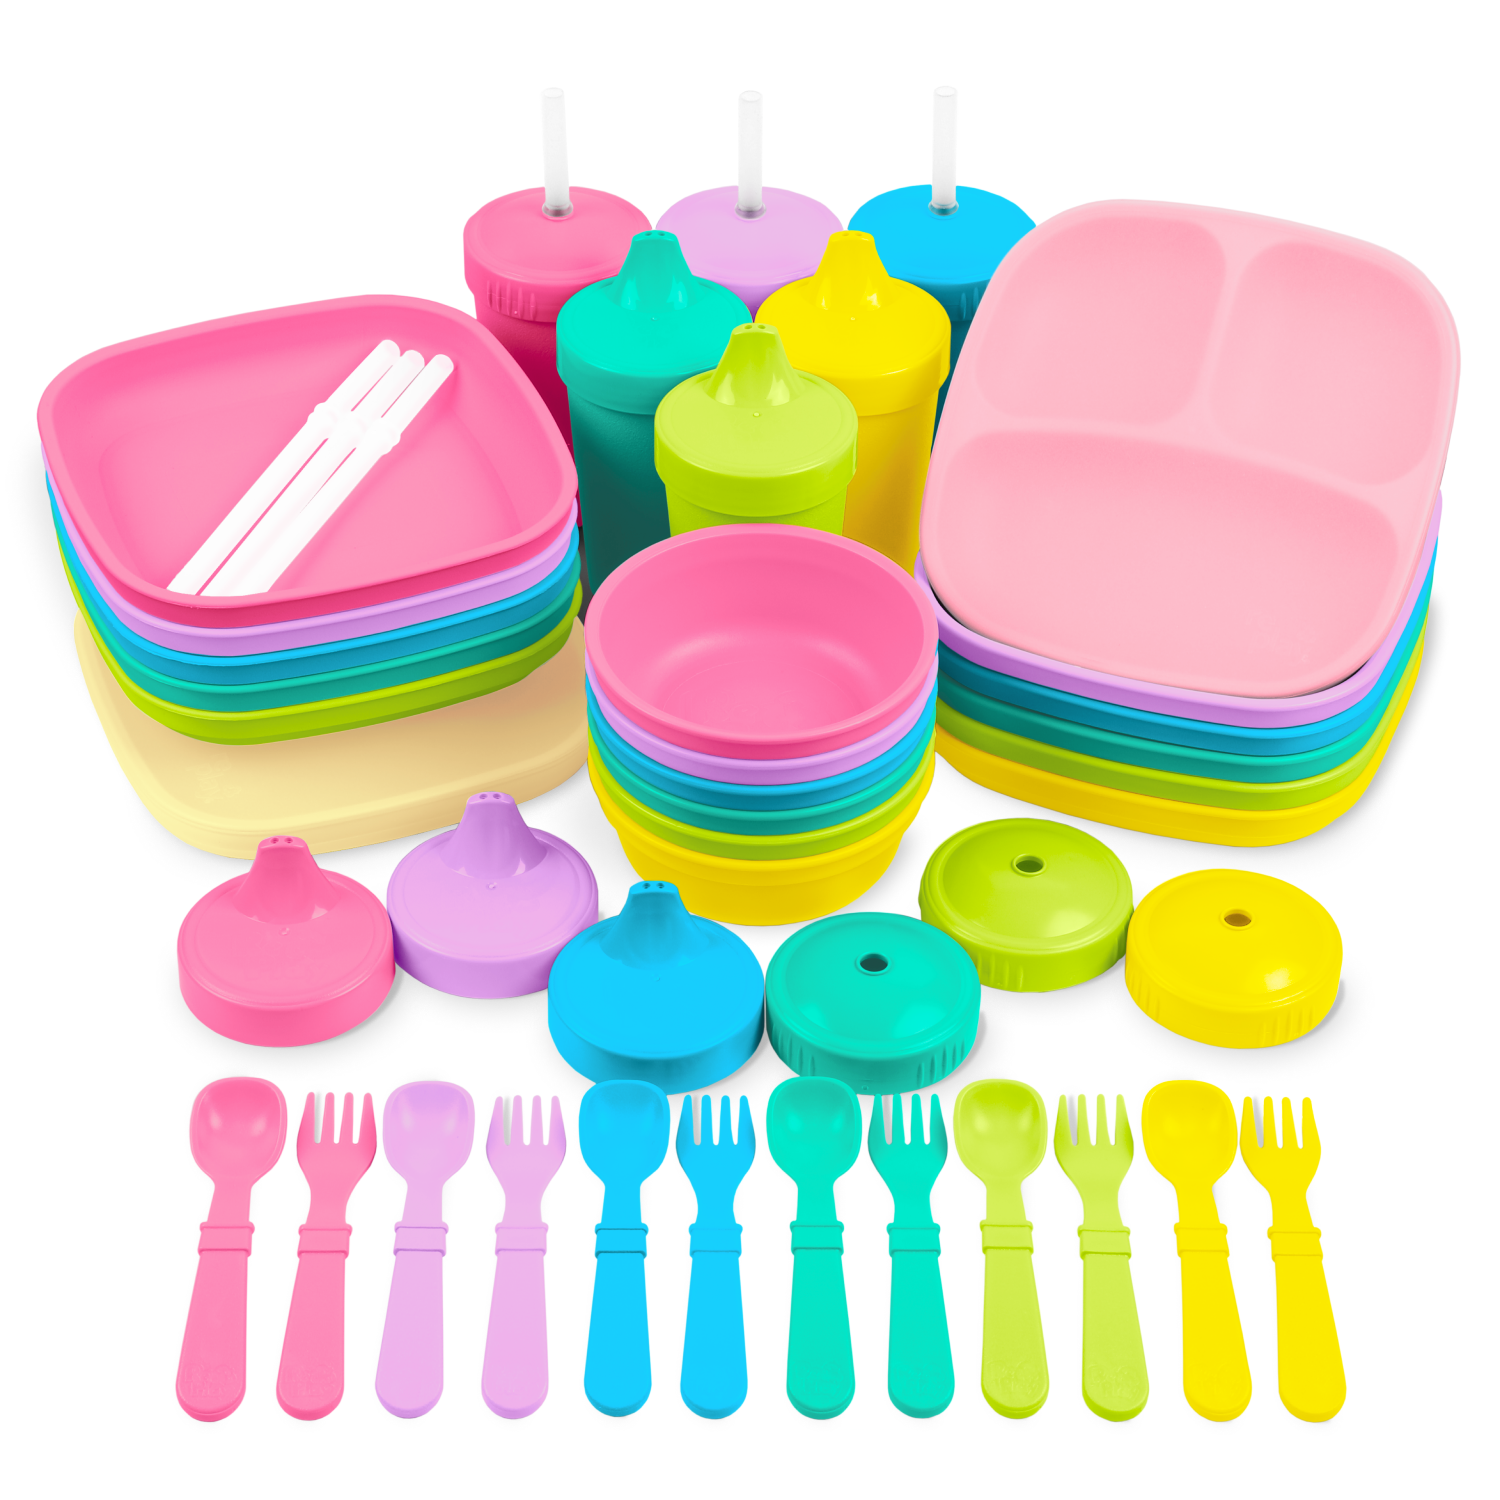 Re-Play Children's Tableware Collection | Family Tableware Made in the ...